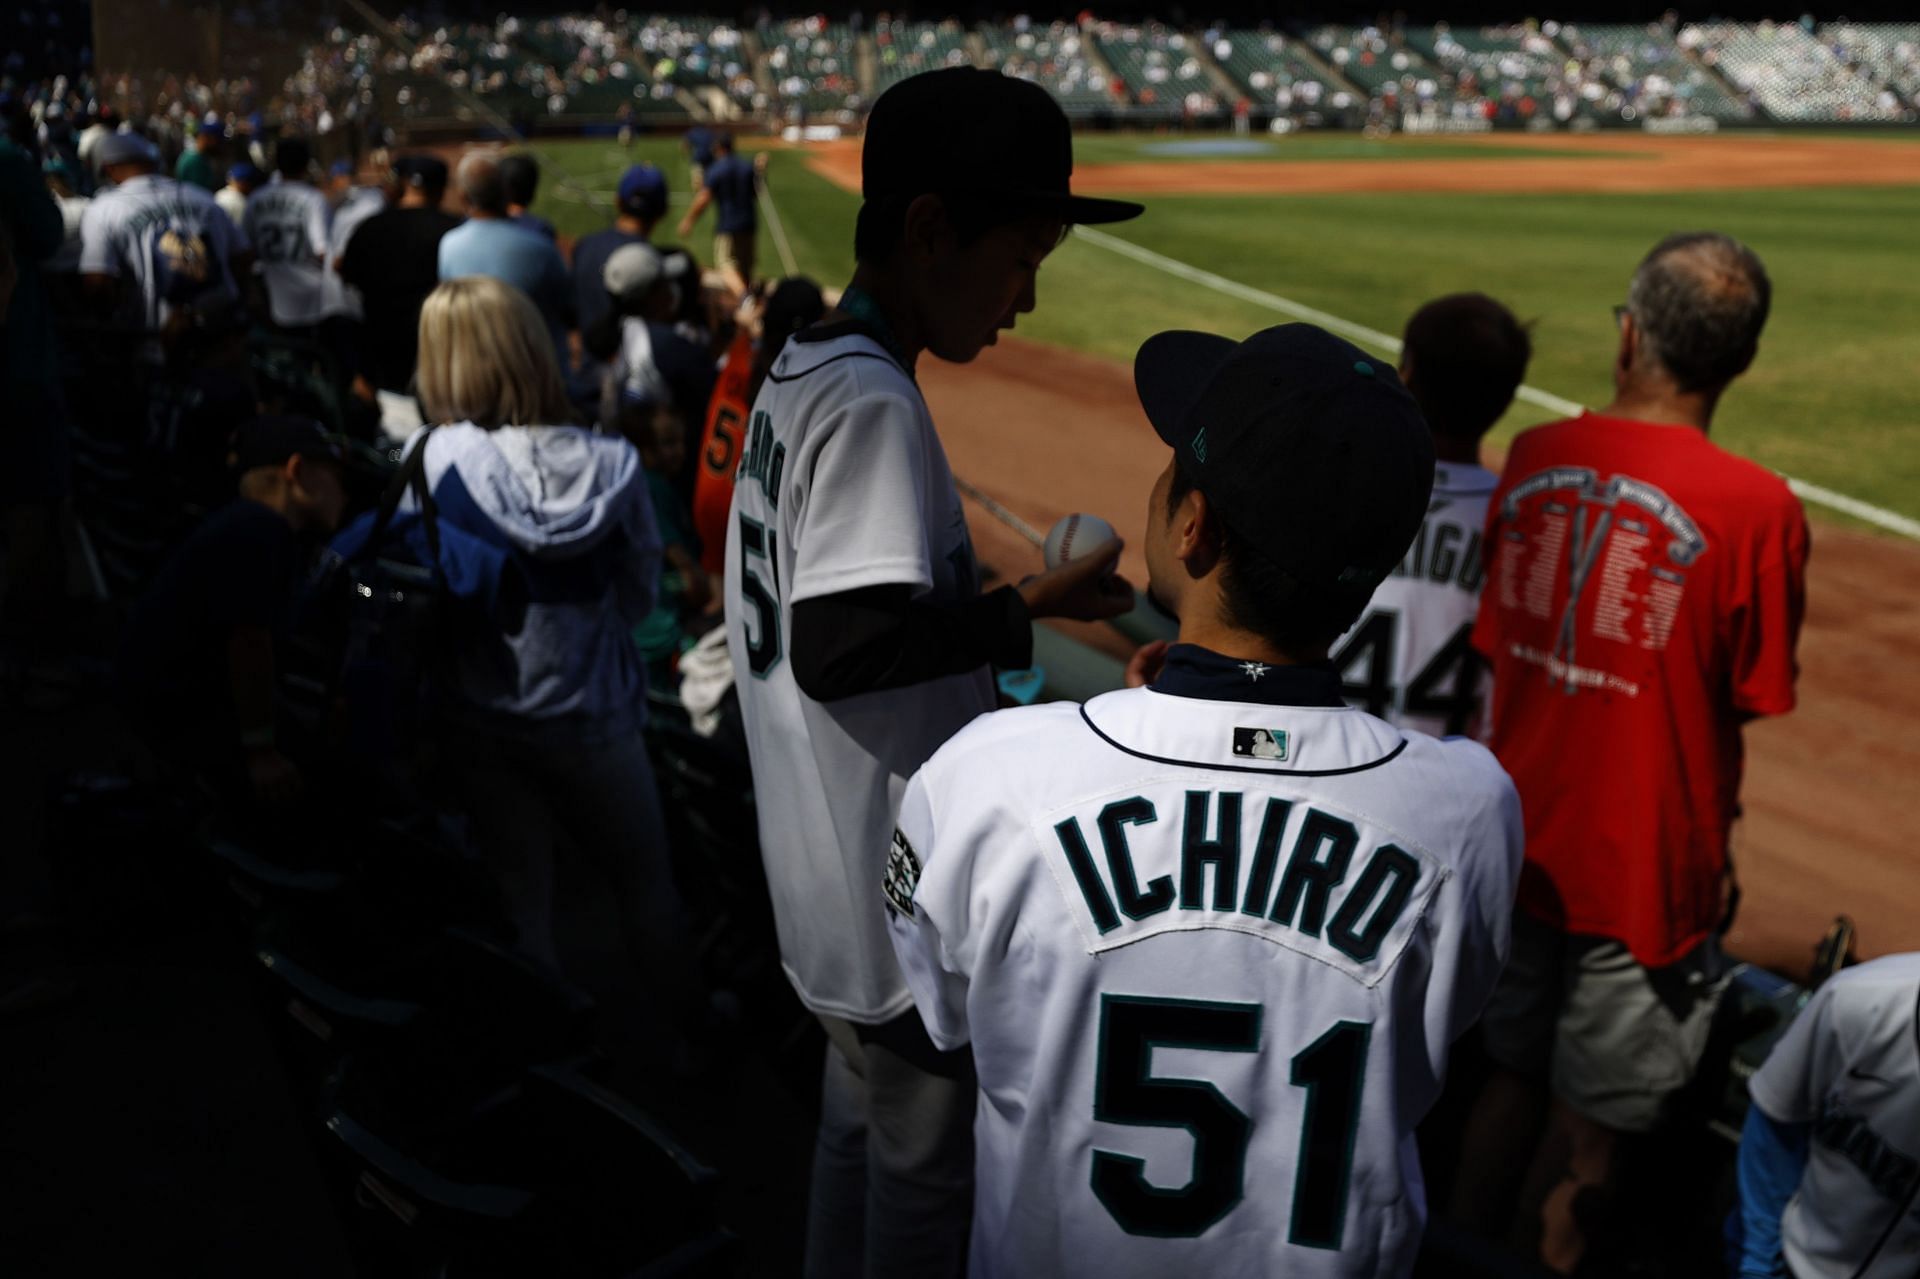 Baseball: Ichiro to be inducted into Mariners Hall of Fame